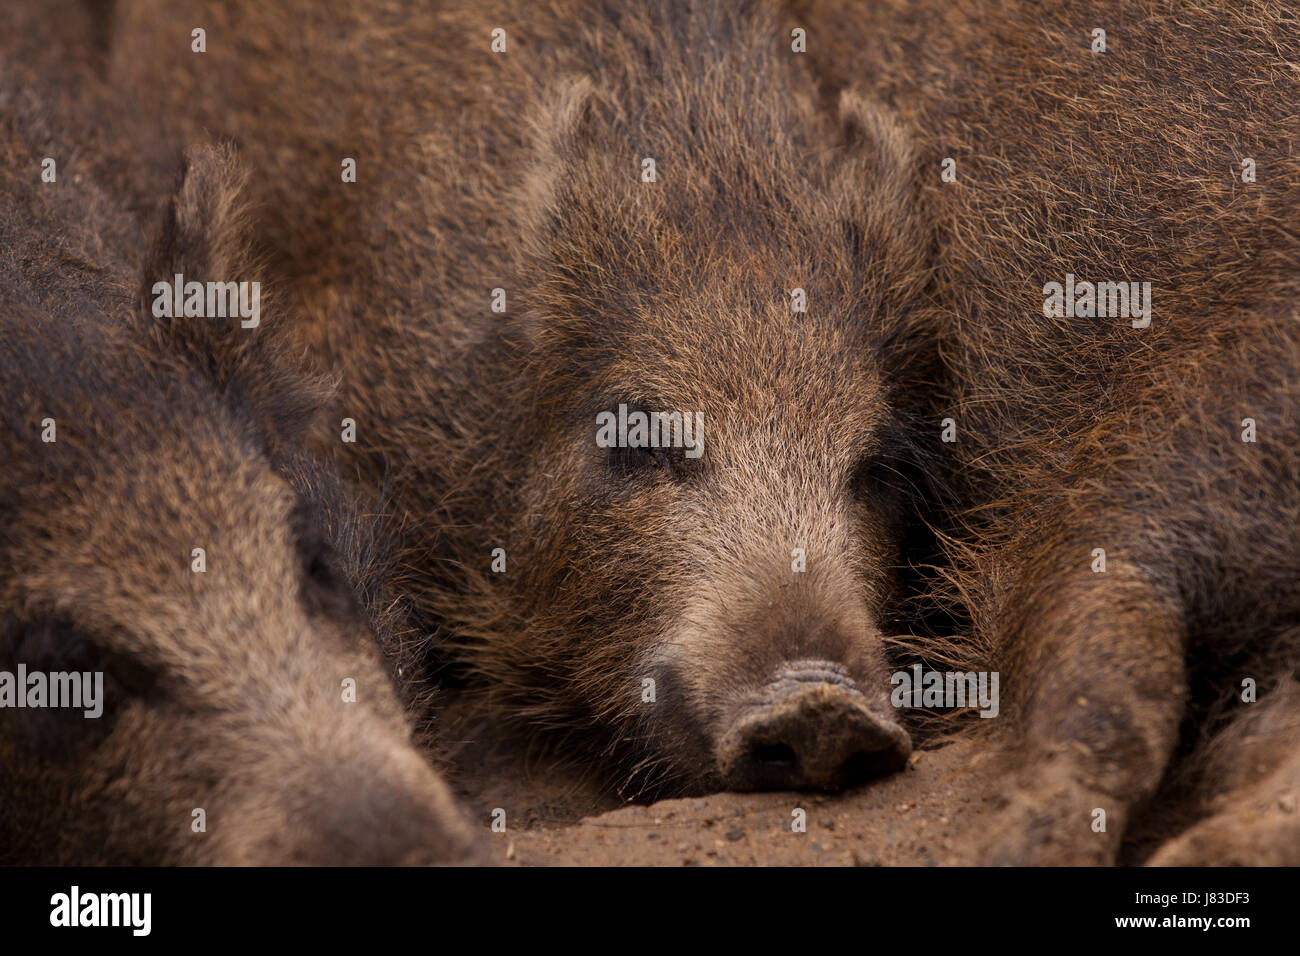 wild animals salvaged group certainty assurance common conjunct together detail Stock Photo